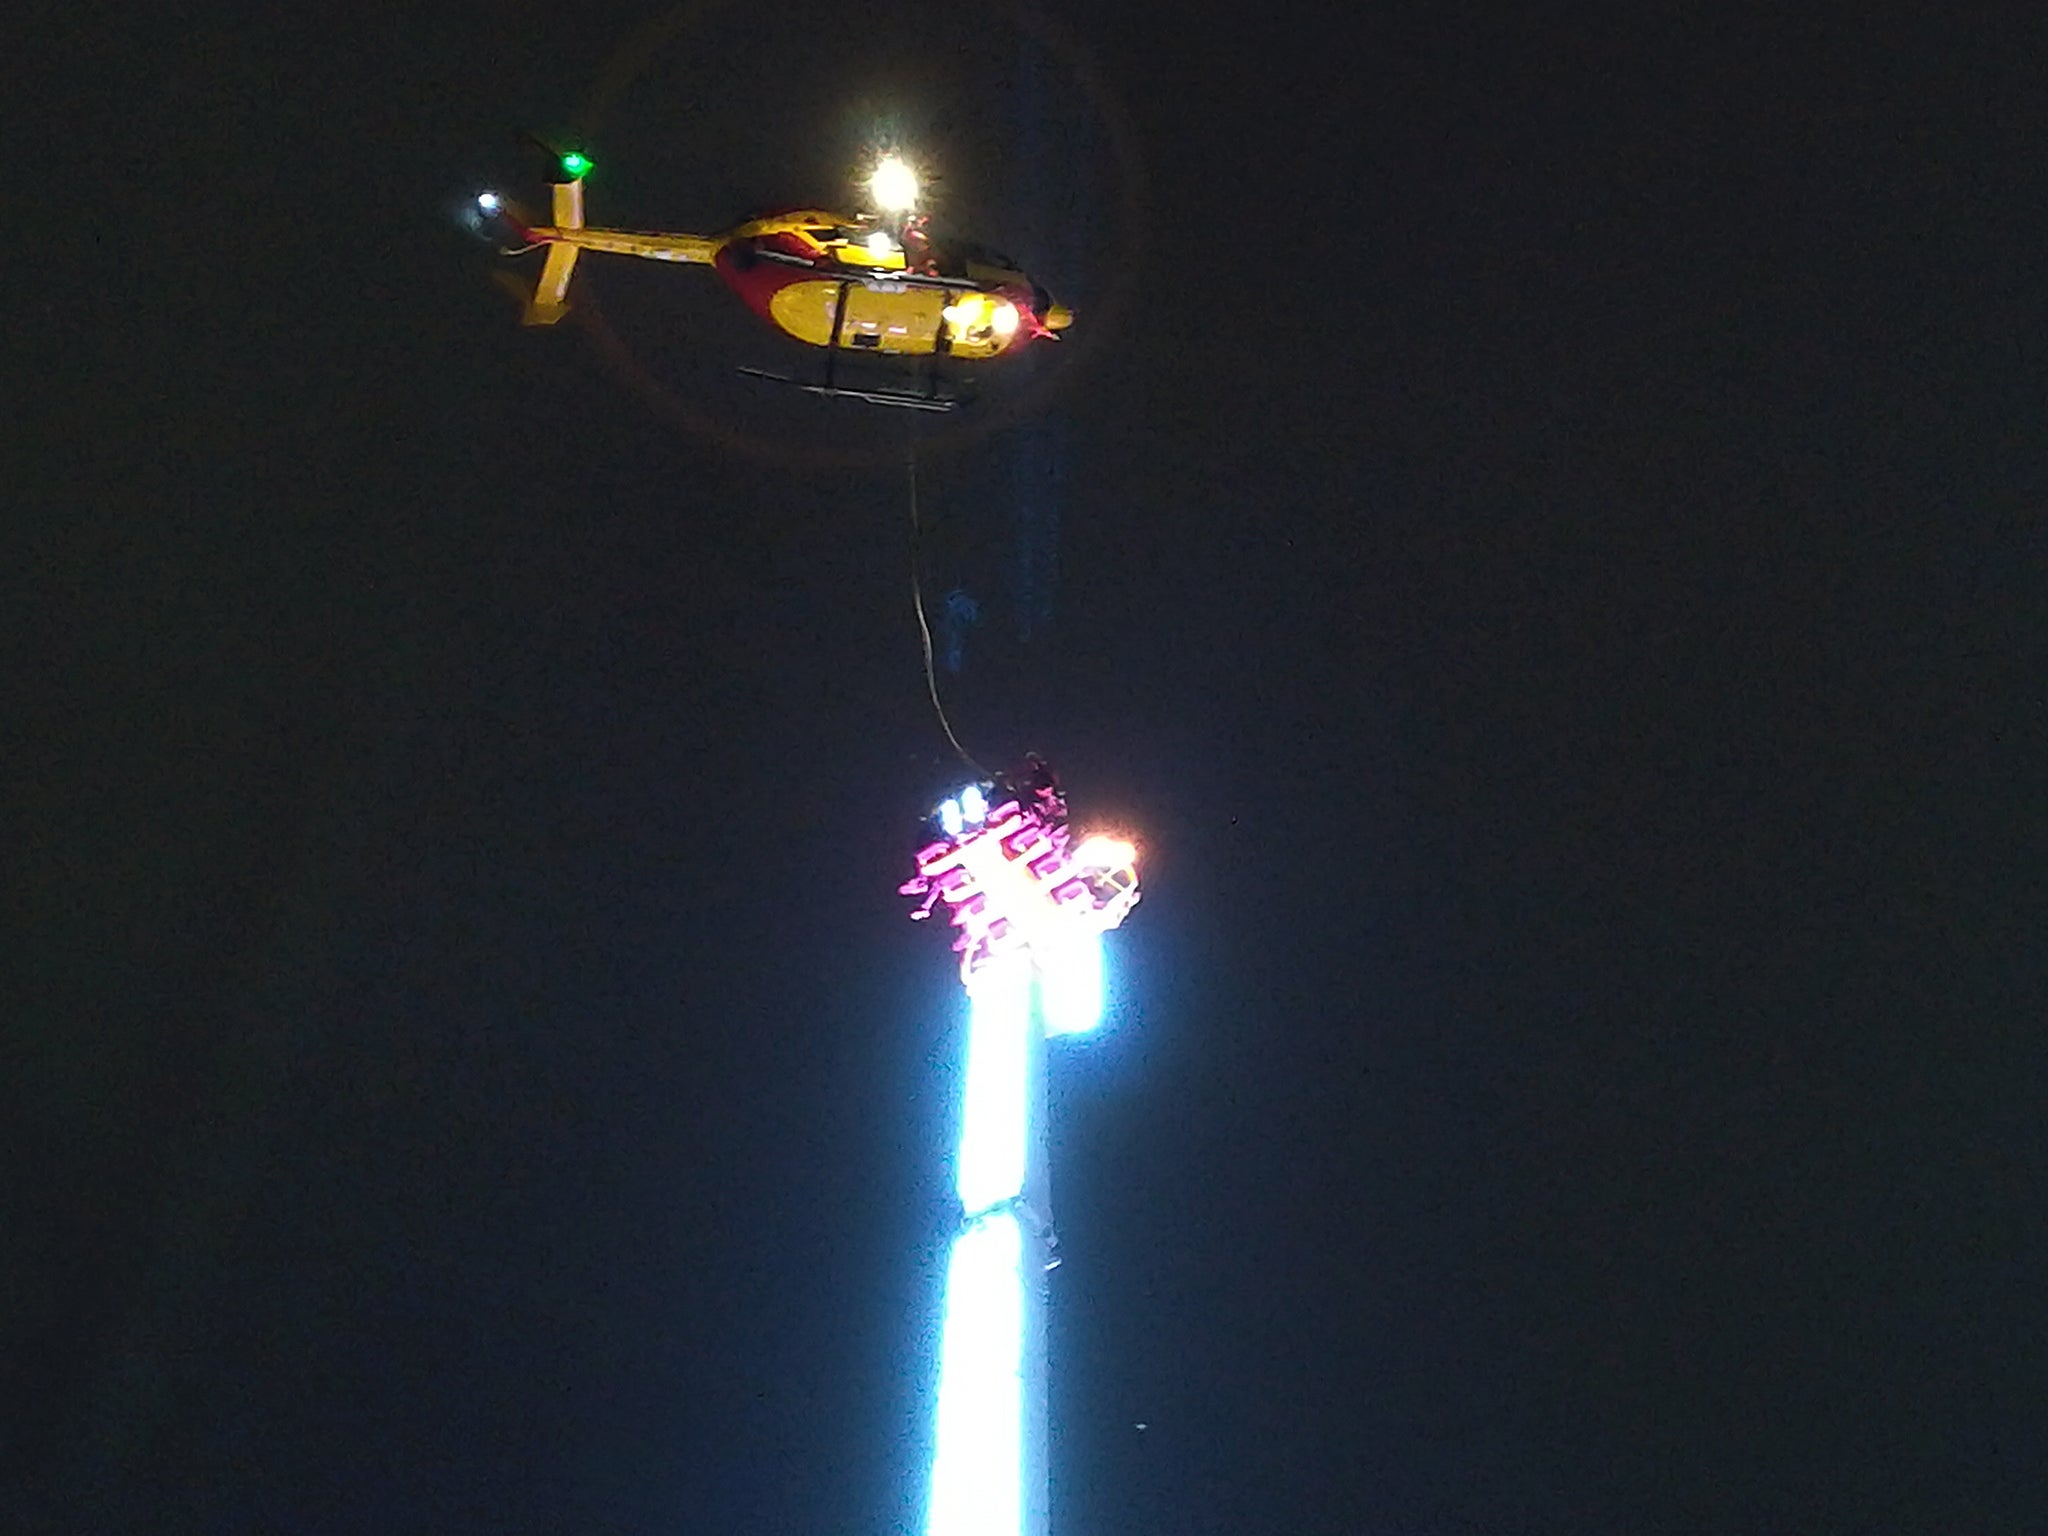 A helicopter hovers over the funfair ride late on New Year’s Eve